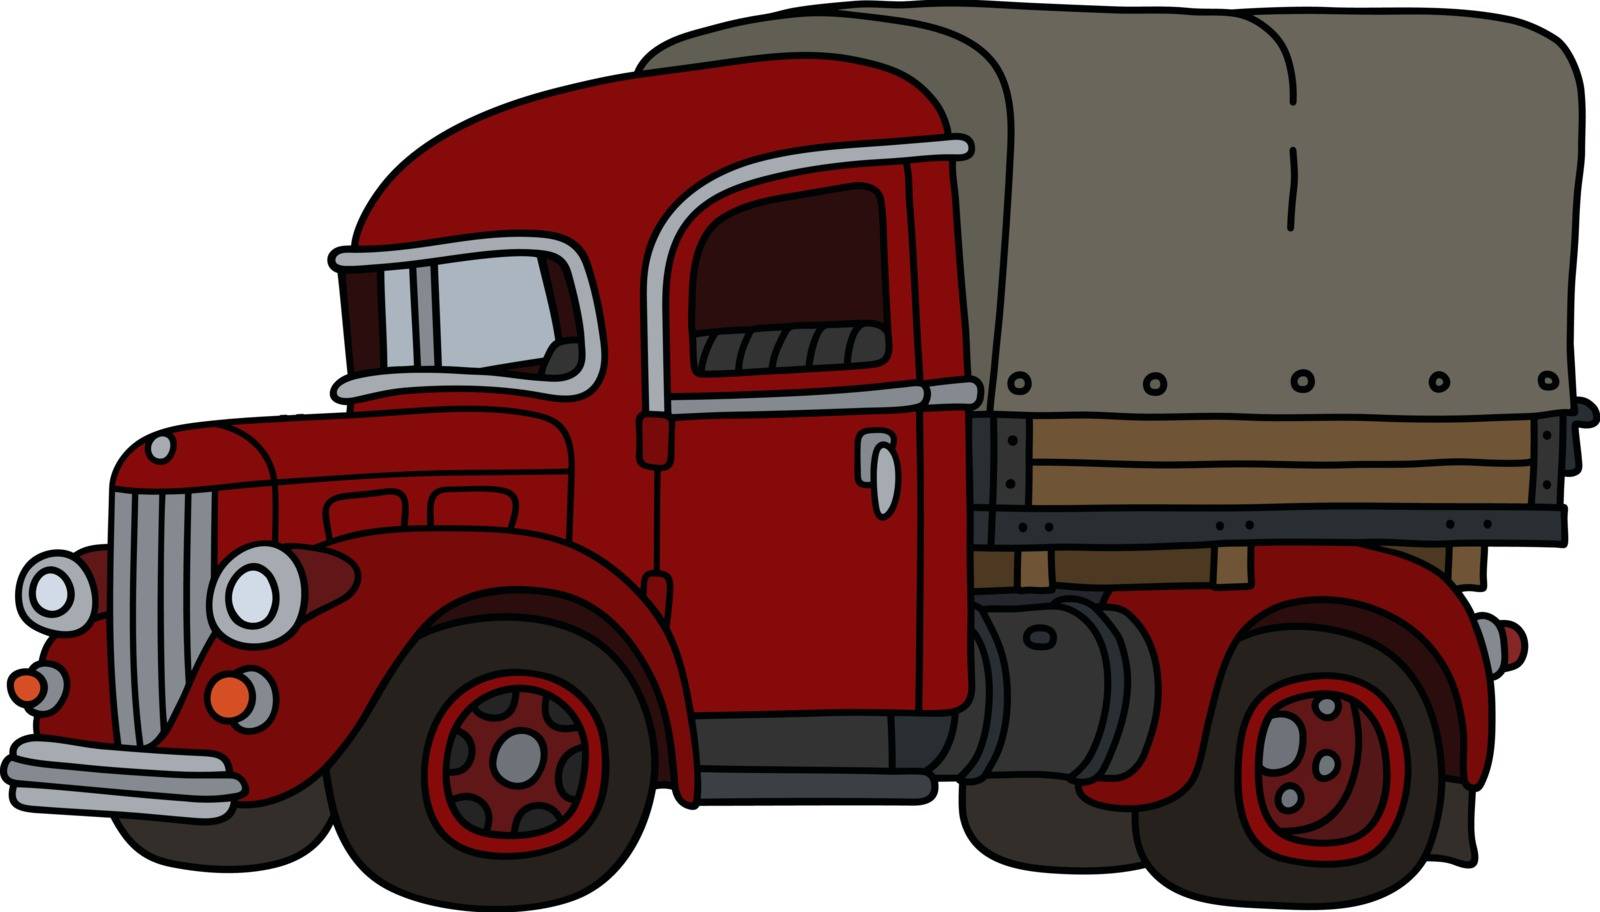 The classic red truck by vostal